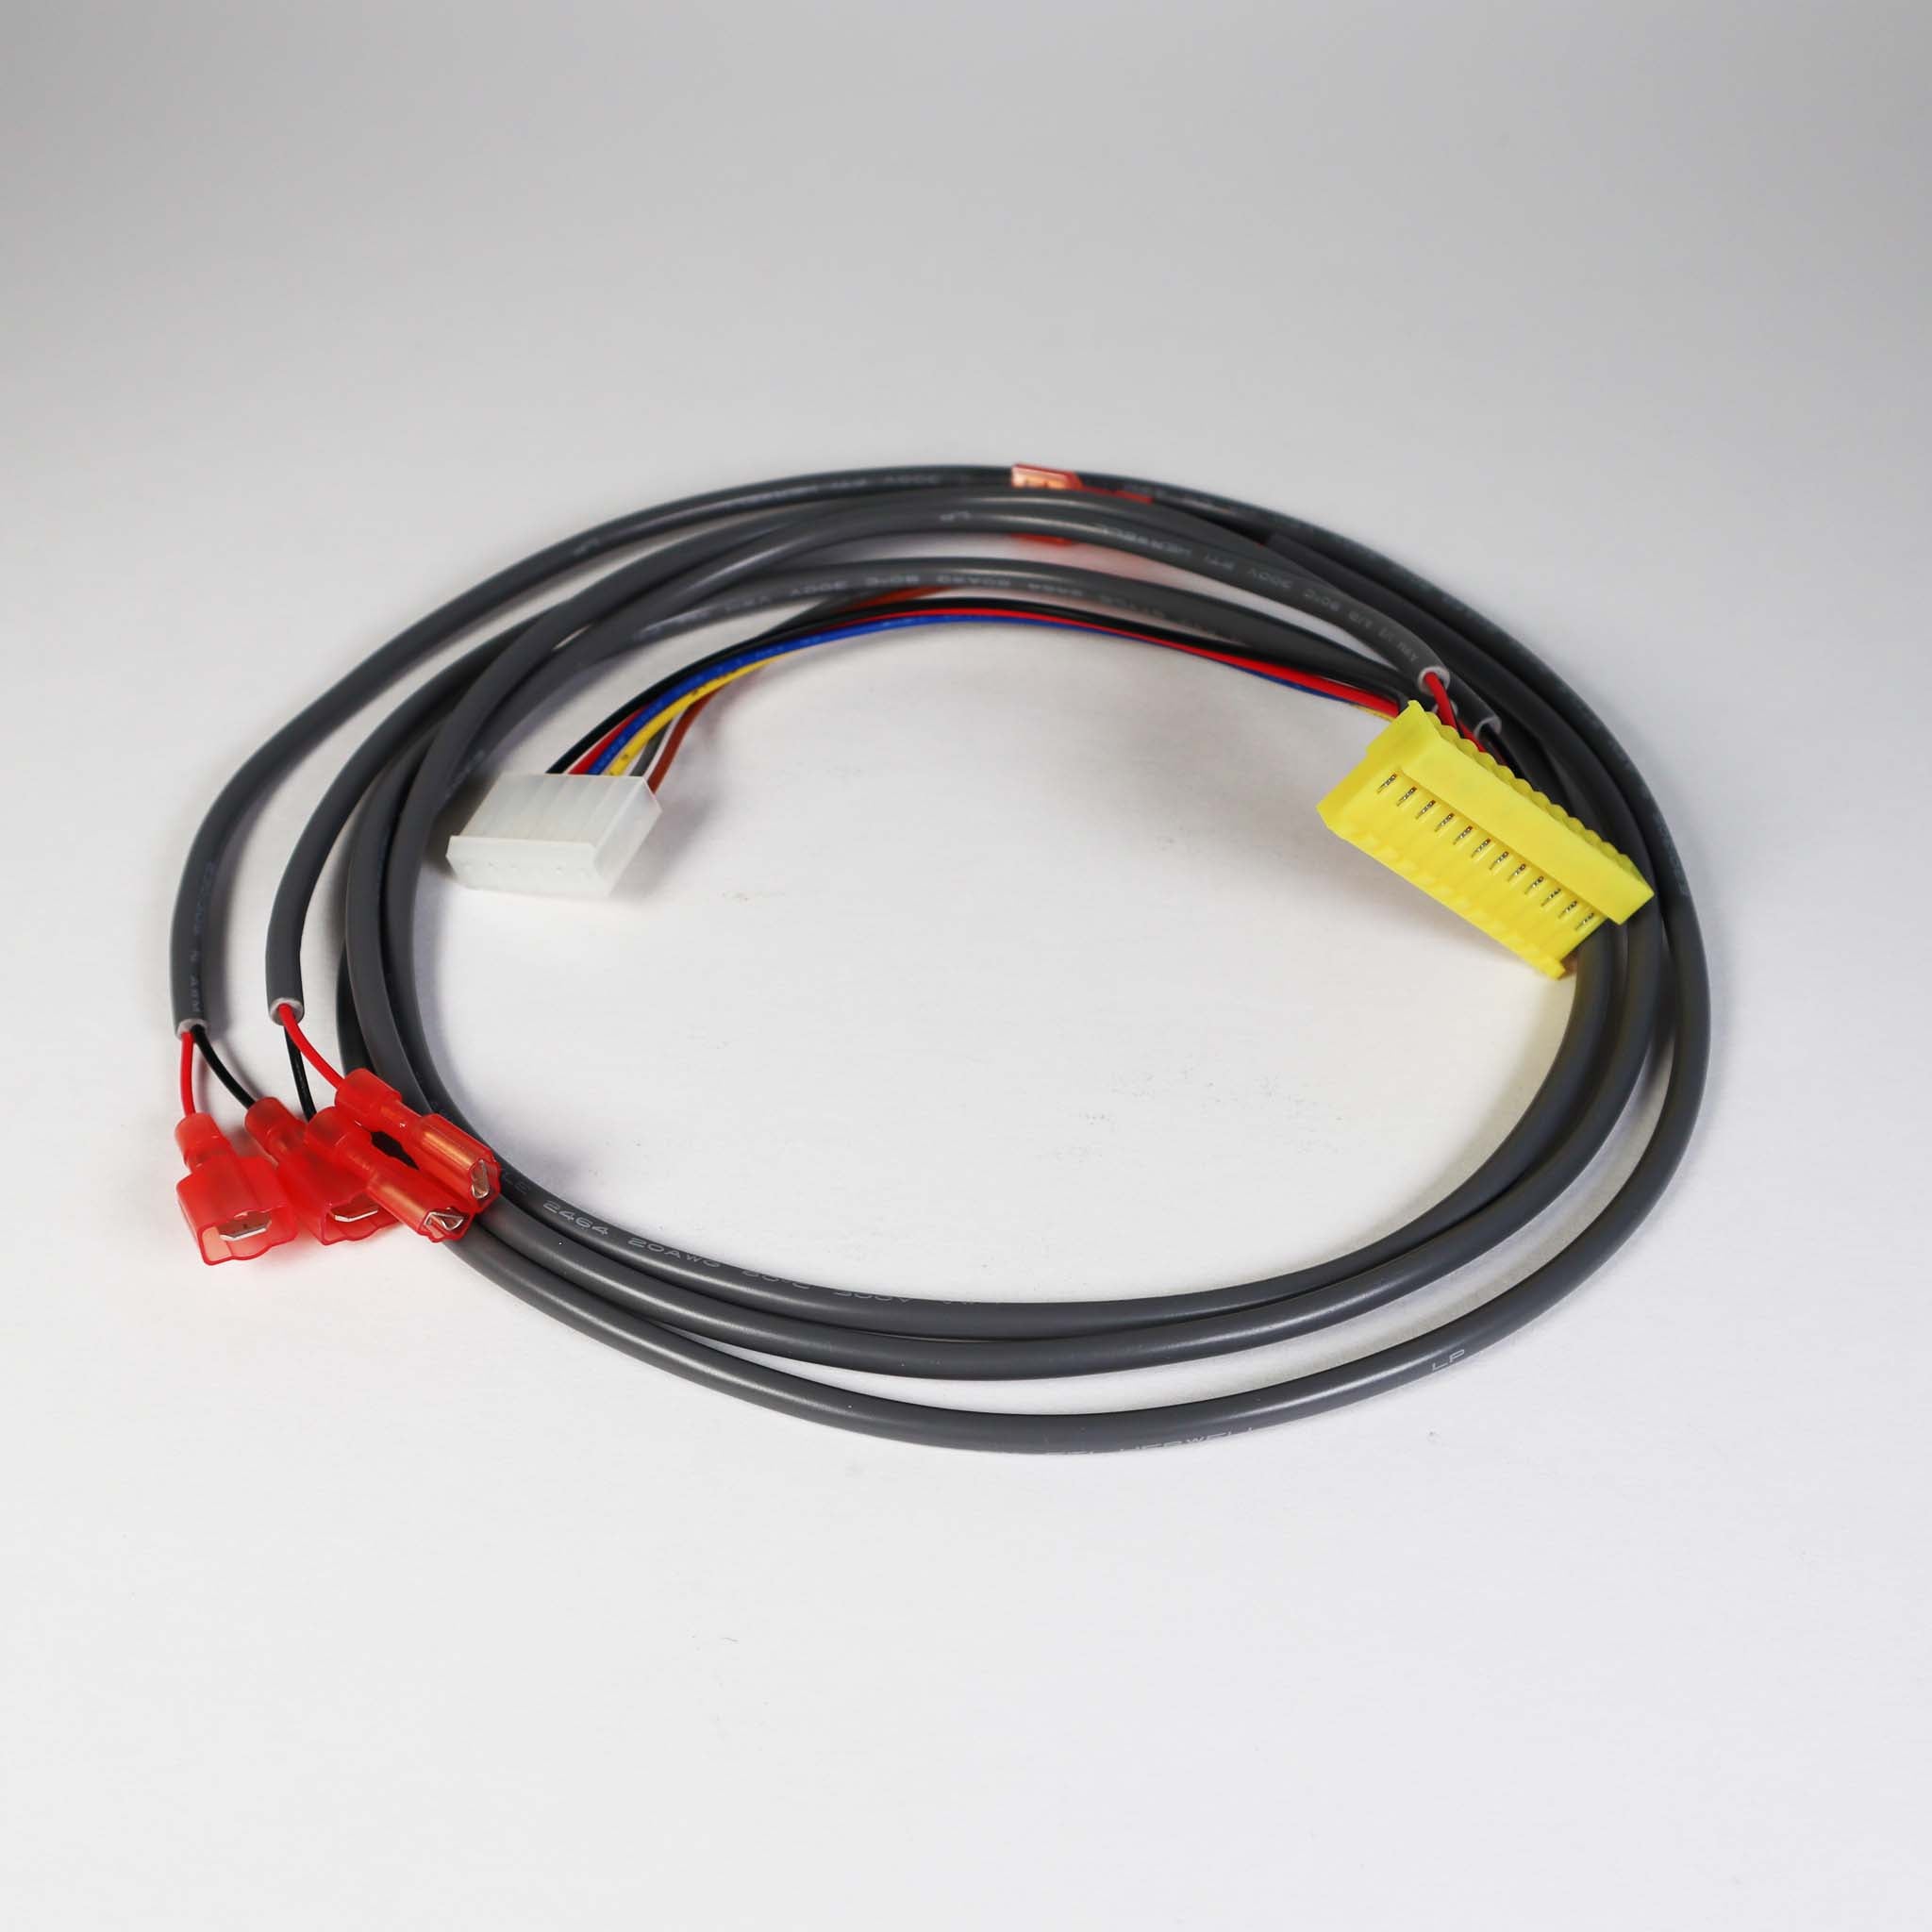 Hysecurity MX000033 PSB to STC Wiring Harness